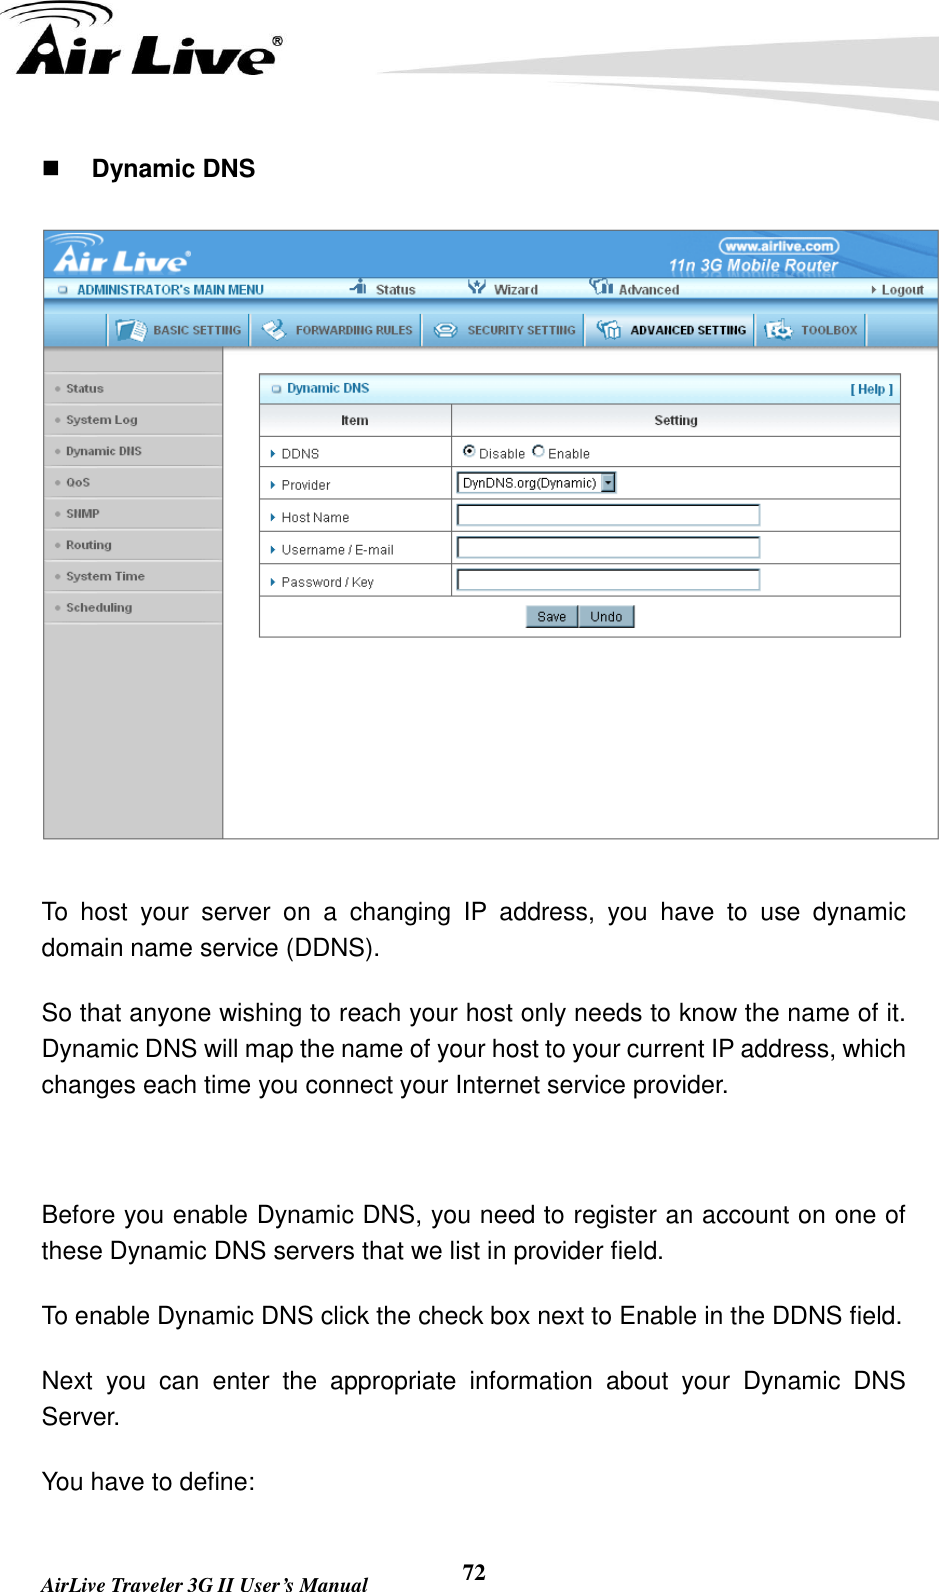   AirLive Traveler 3G II User’s Manual 72  Dynamic DNS  To  host  your  server  on  a  changing  IP  address,  you  have  to  use  dynamic domain name service (DDNS).   So that anyone wishing to reach your host only needs to know the name of it. Dynamic DNS will map the name of your host to your current IP address, which changes each time you connect your Internet service provider.    Before you enable Dynamic DNS, you need to register an account on one of these Dynamic DNS servers that we list in provider field.   To enable Dynamic DNS click the check box next to Enable in the DDNS field. Next  you  can  enter  the  appropriate  information  about  your  Dynamic  DNS Server. You have to define: 